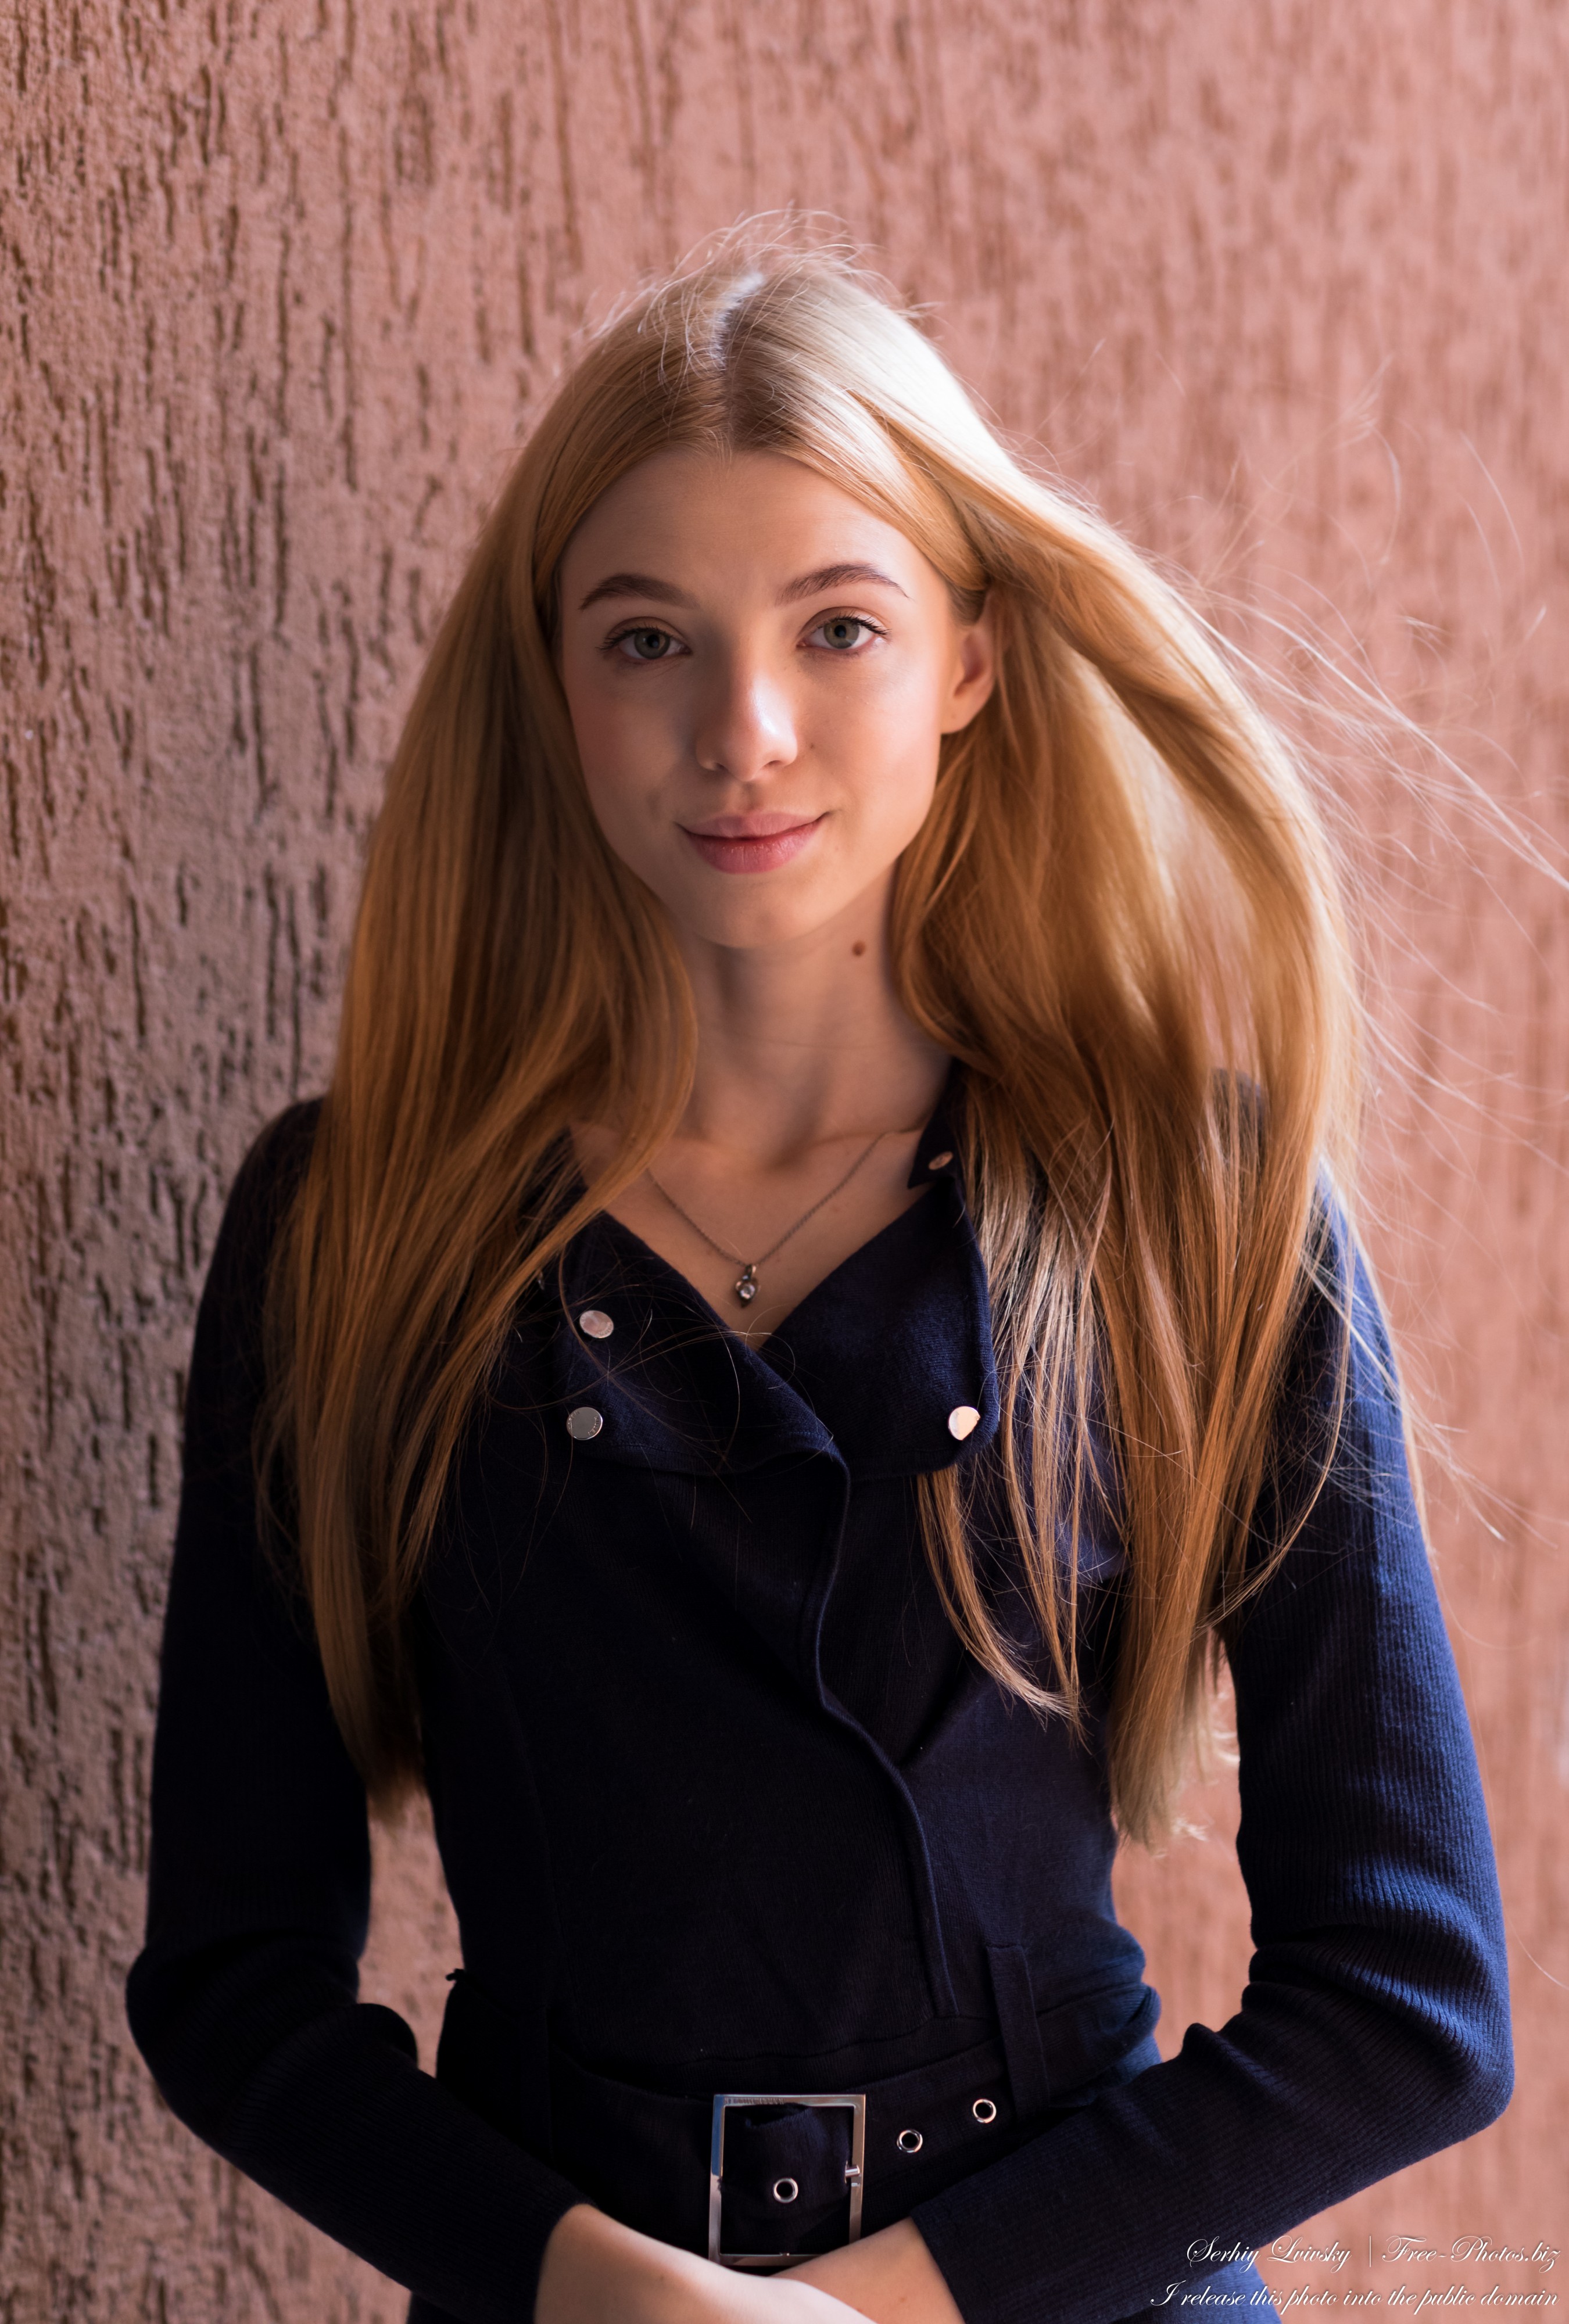 Anna - an 18-year-old girl photographed in October 2020 by Serhiy Lvivsky, picture 20